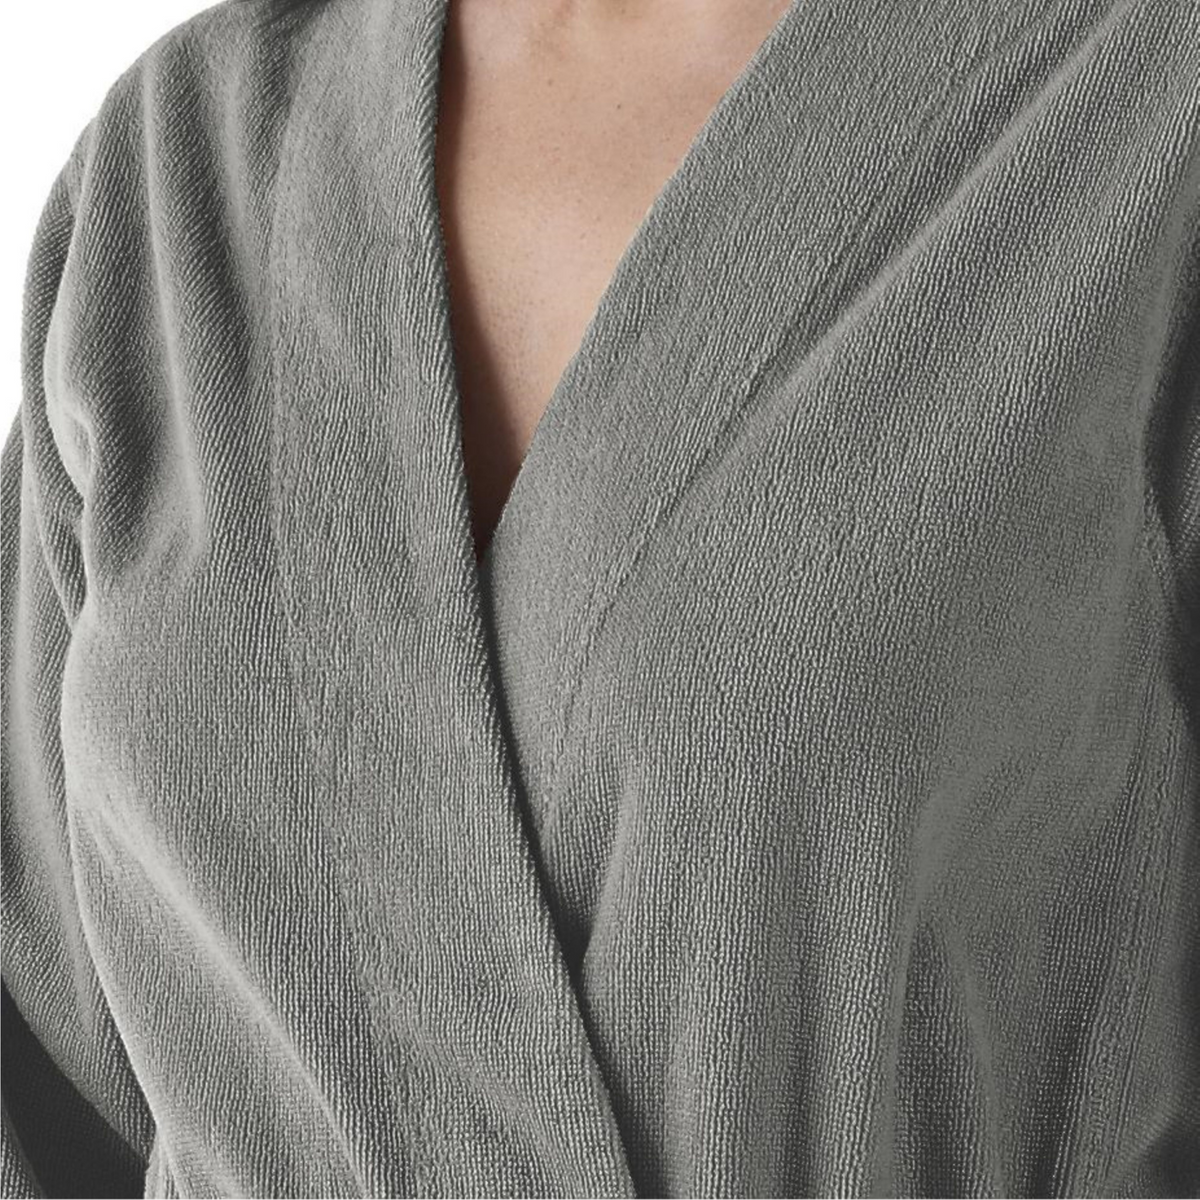 Abyss Spa Bath Robes and Slippers Gris Fine Linens